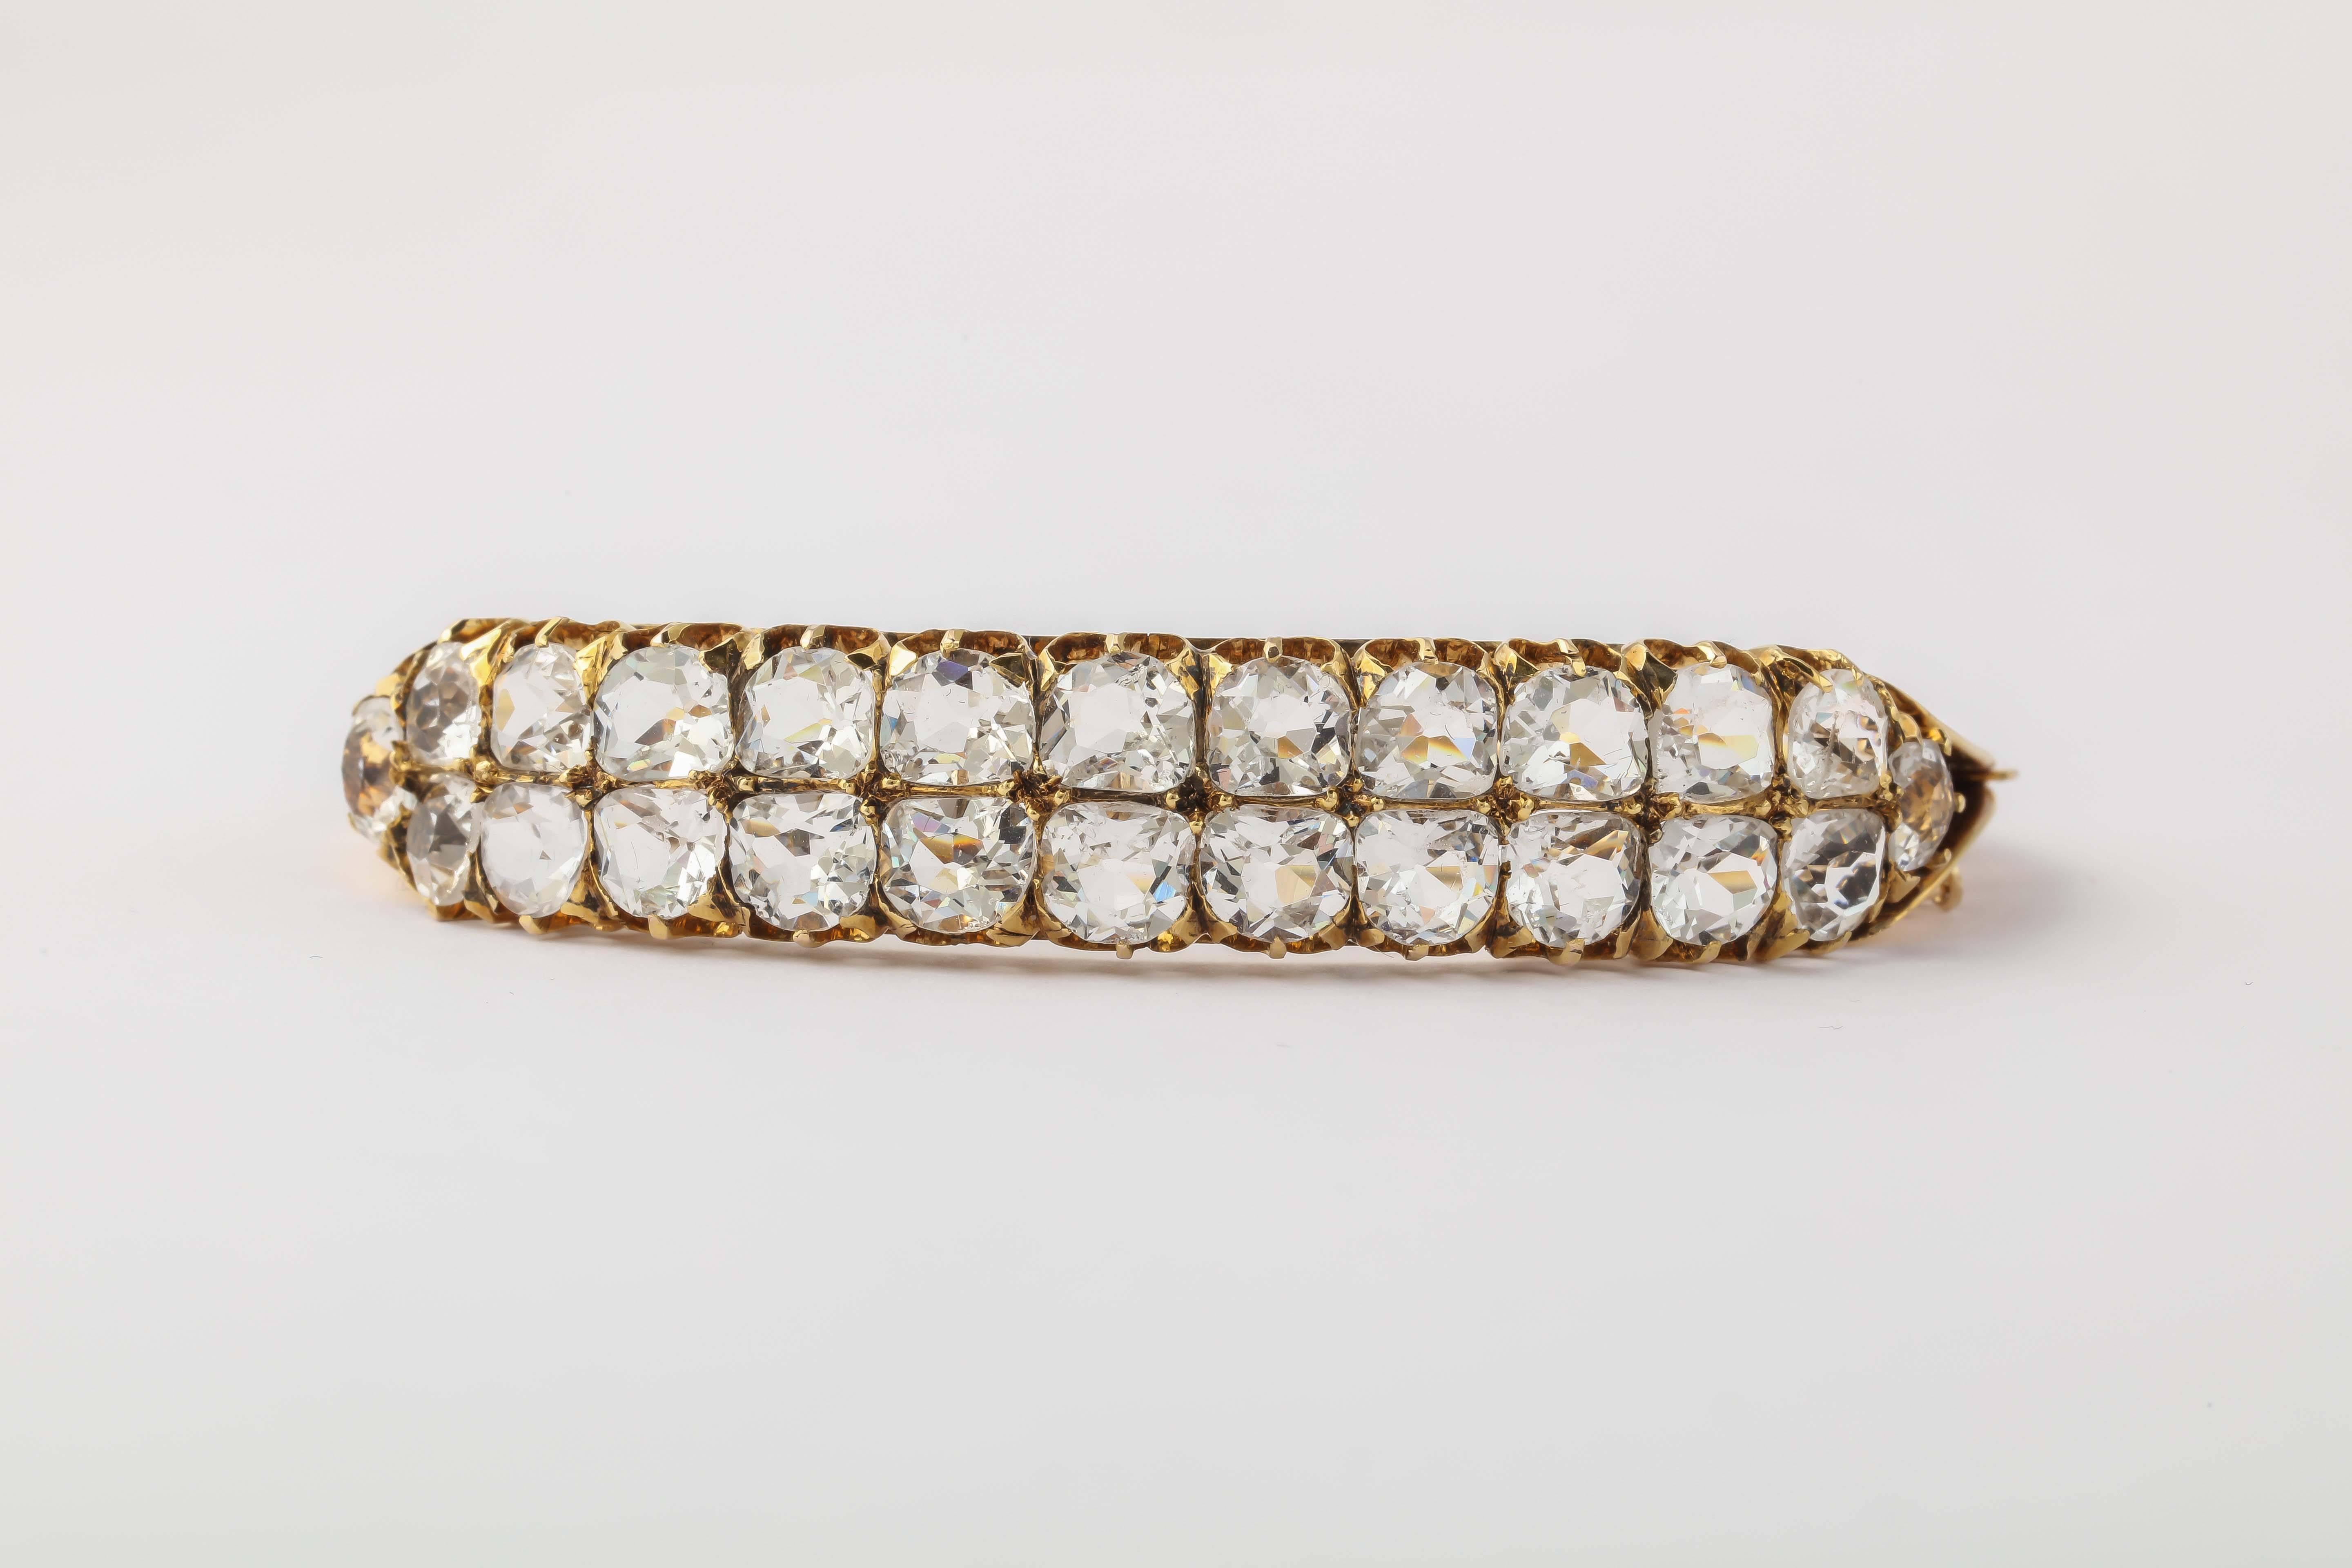 14kt Yellow Gold hinged bangle set with a double row of faceted White Sapphires or crystal.  Ca1910 - Edwardian. Next best thing to Diamonds. Prong set with heavy claw settings.